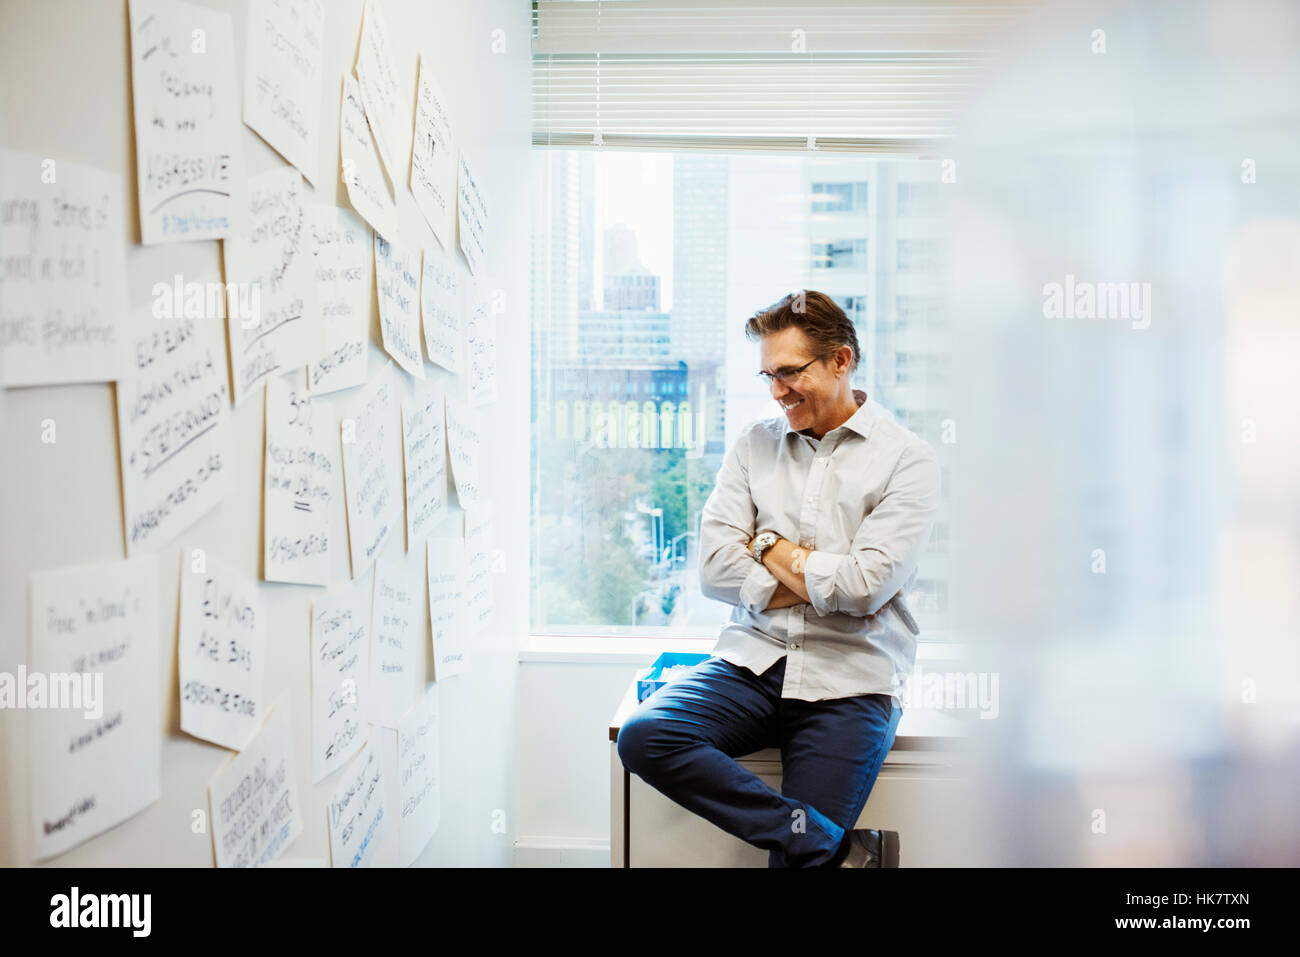 A man leaning on a desk with his arms folded in an office looking at pieces of paper pinned on a whiteboard. Stock Photo